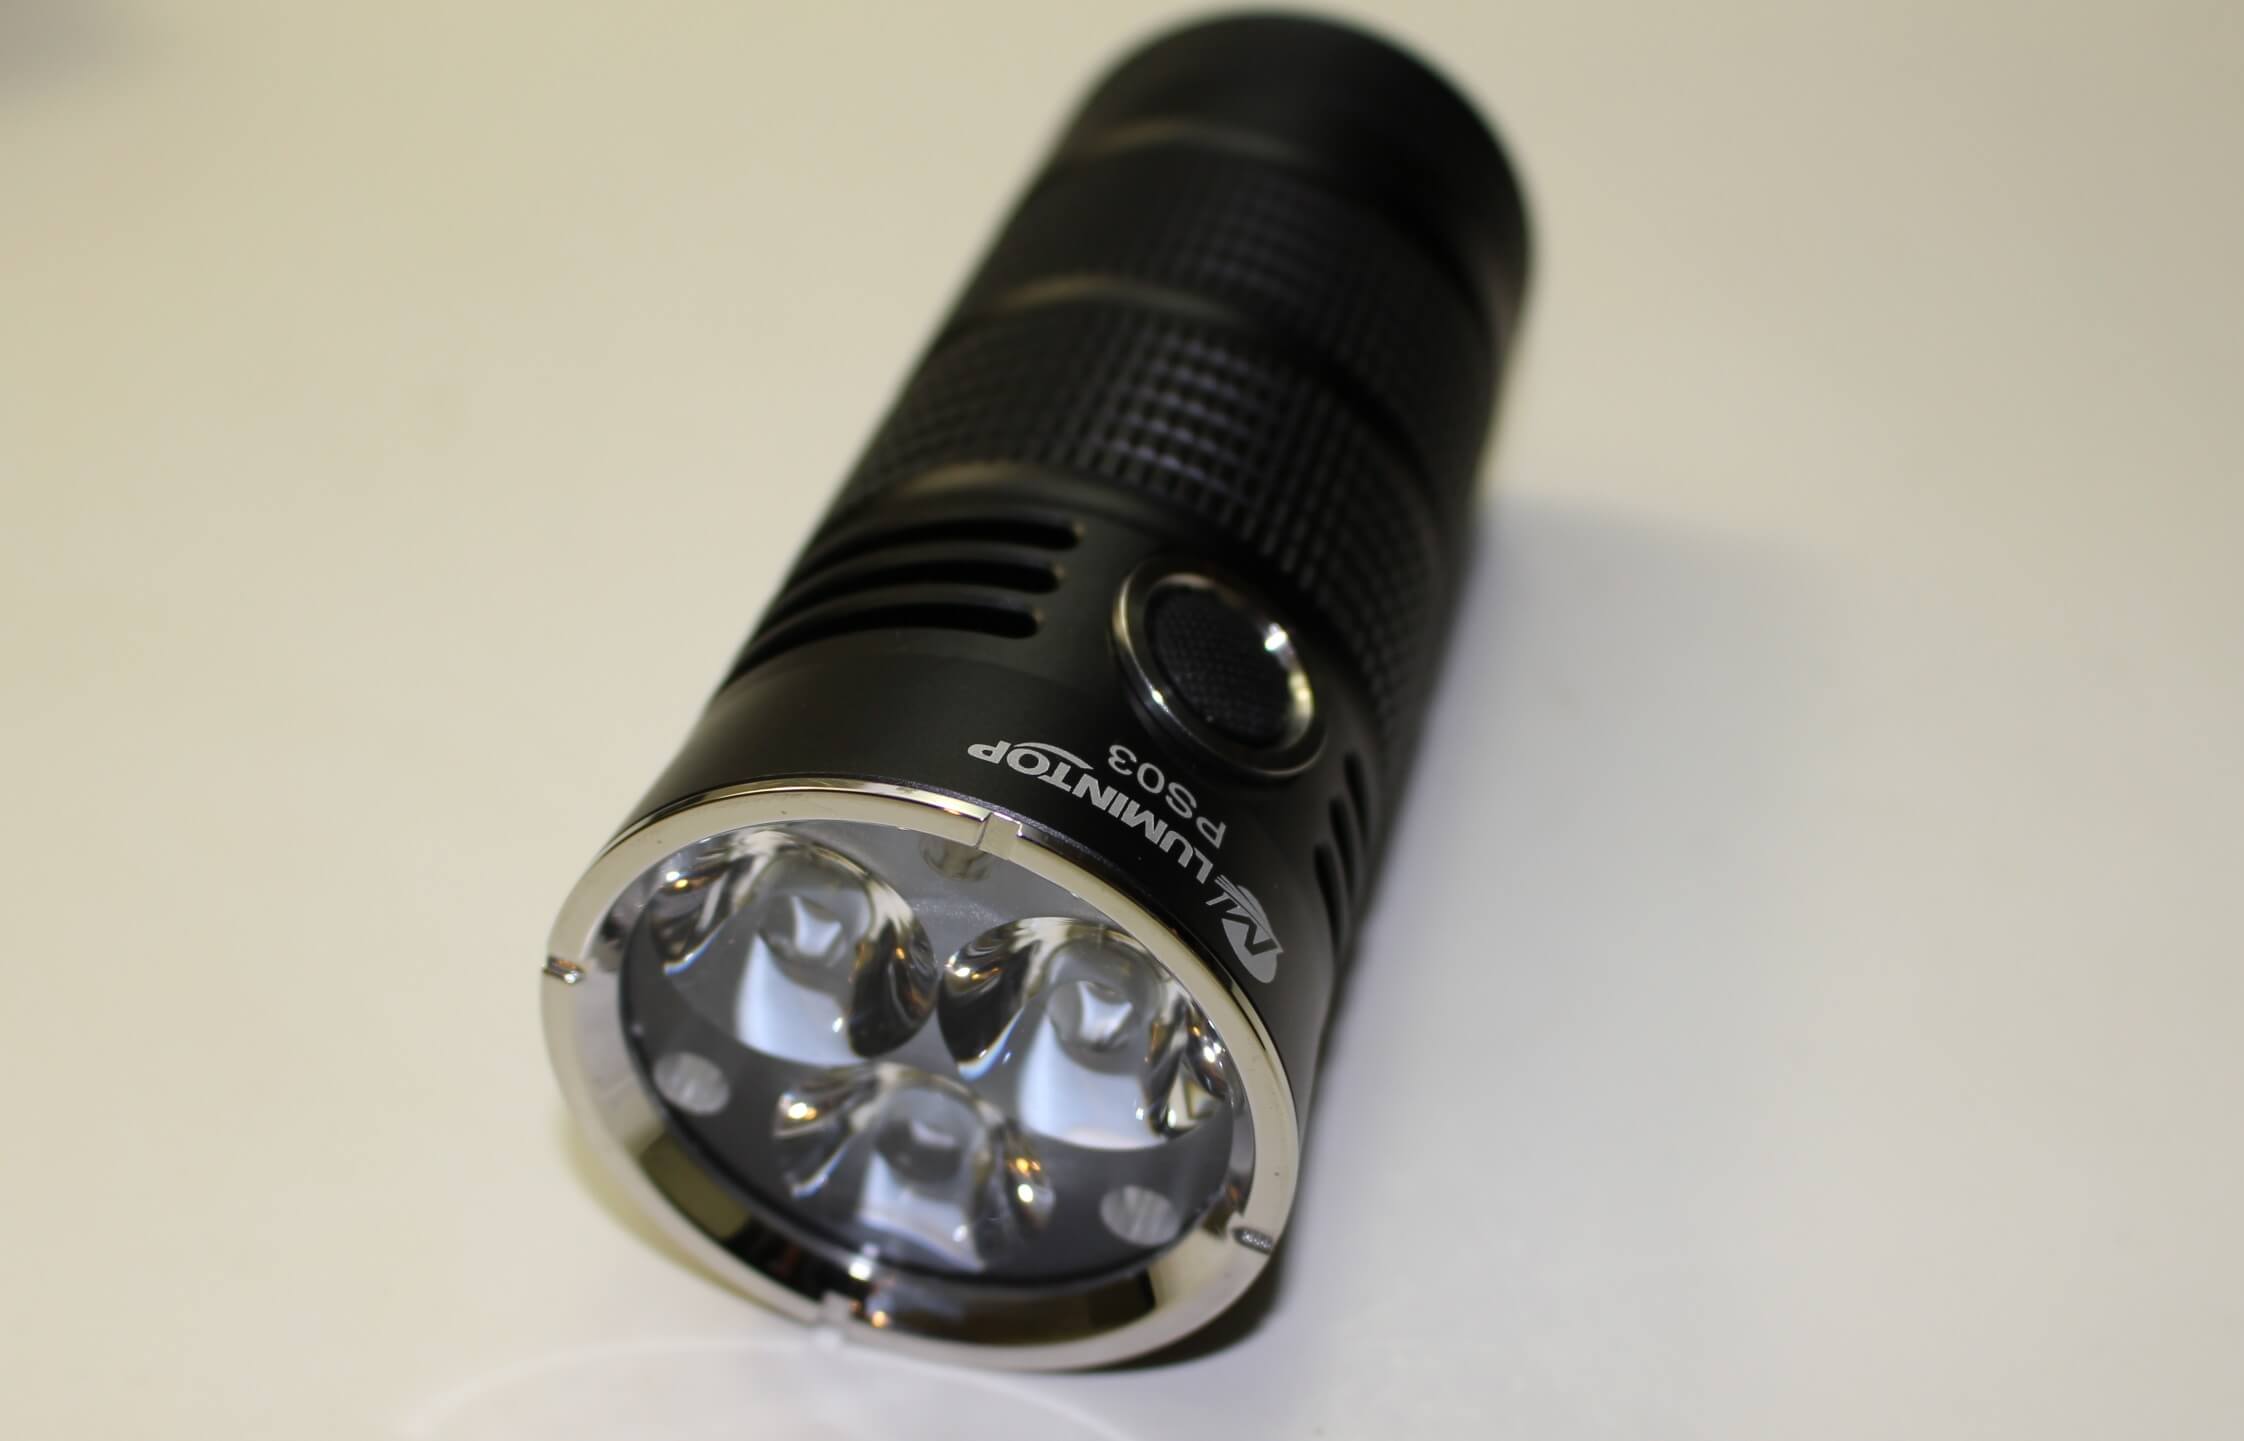 Lumintop PS03 LED Searchlight Review